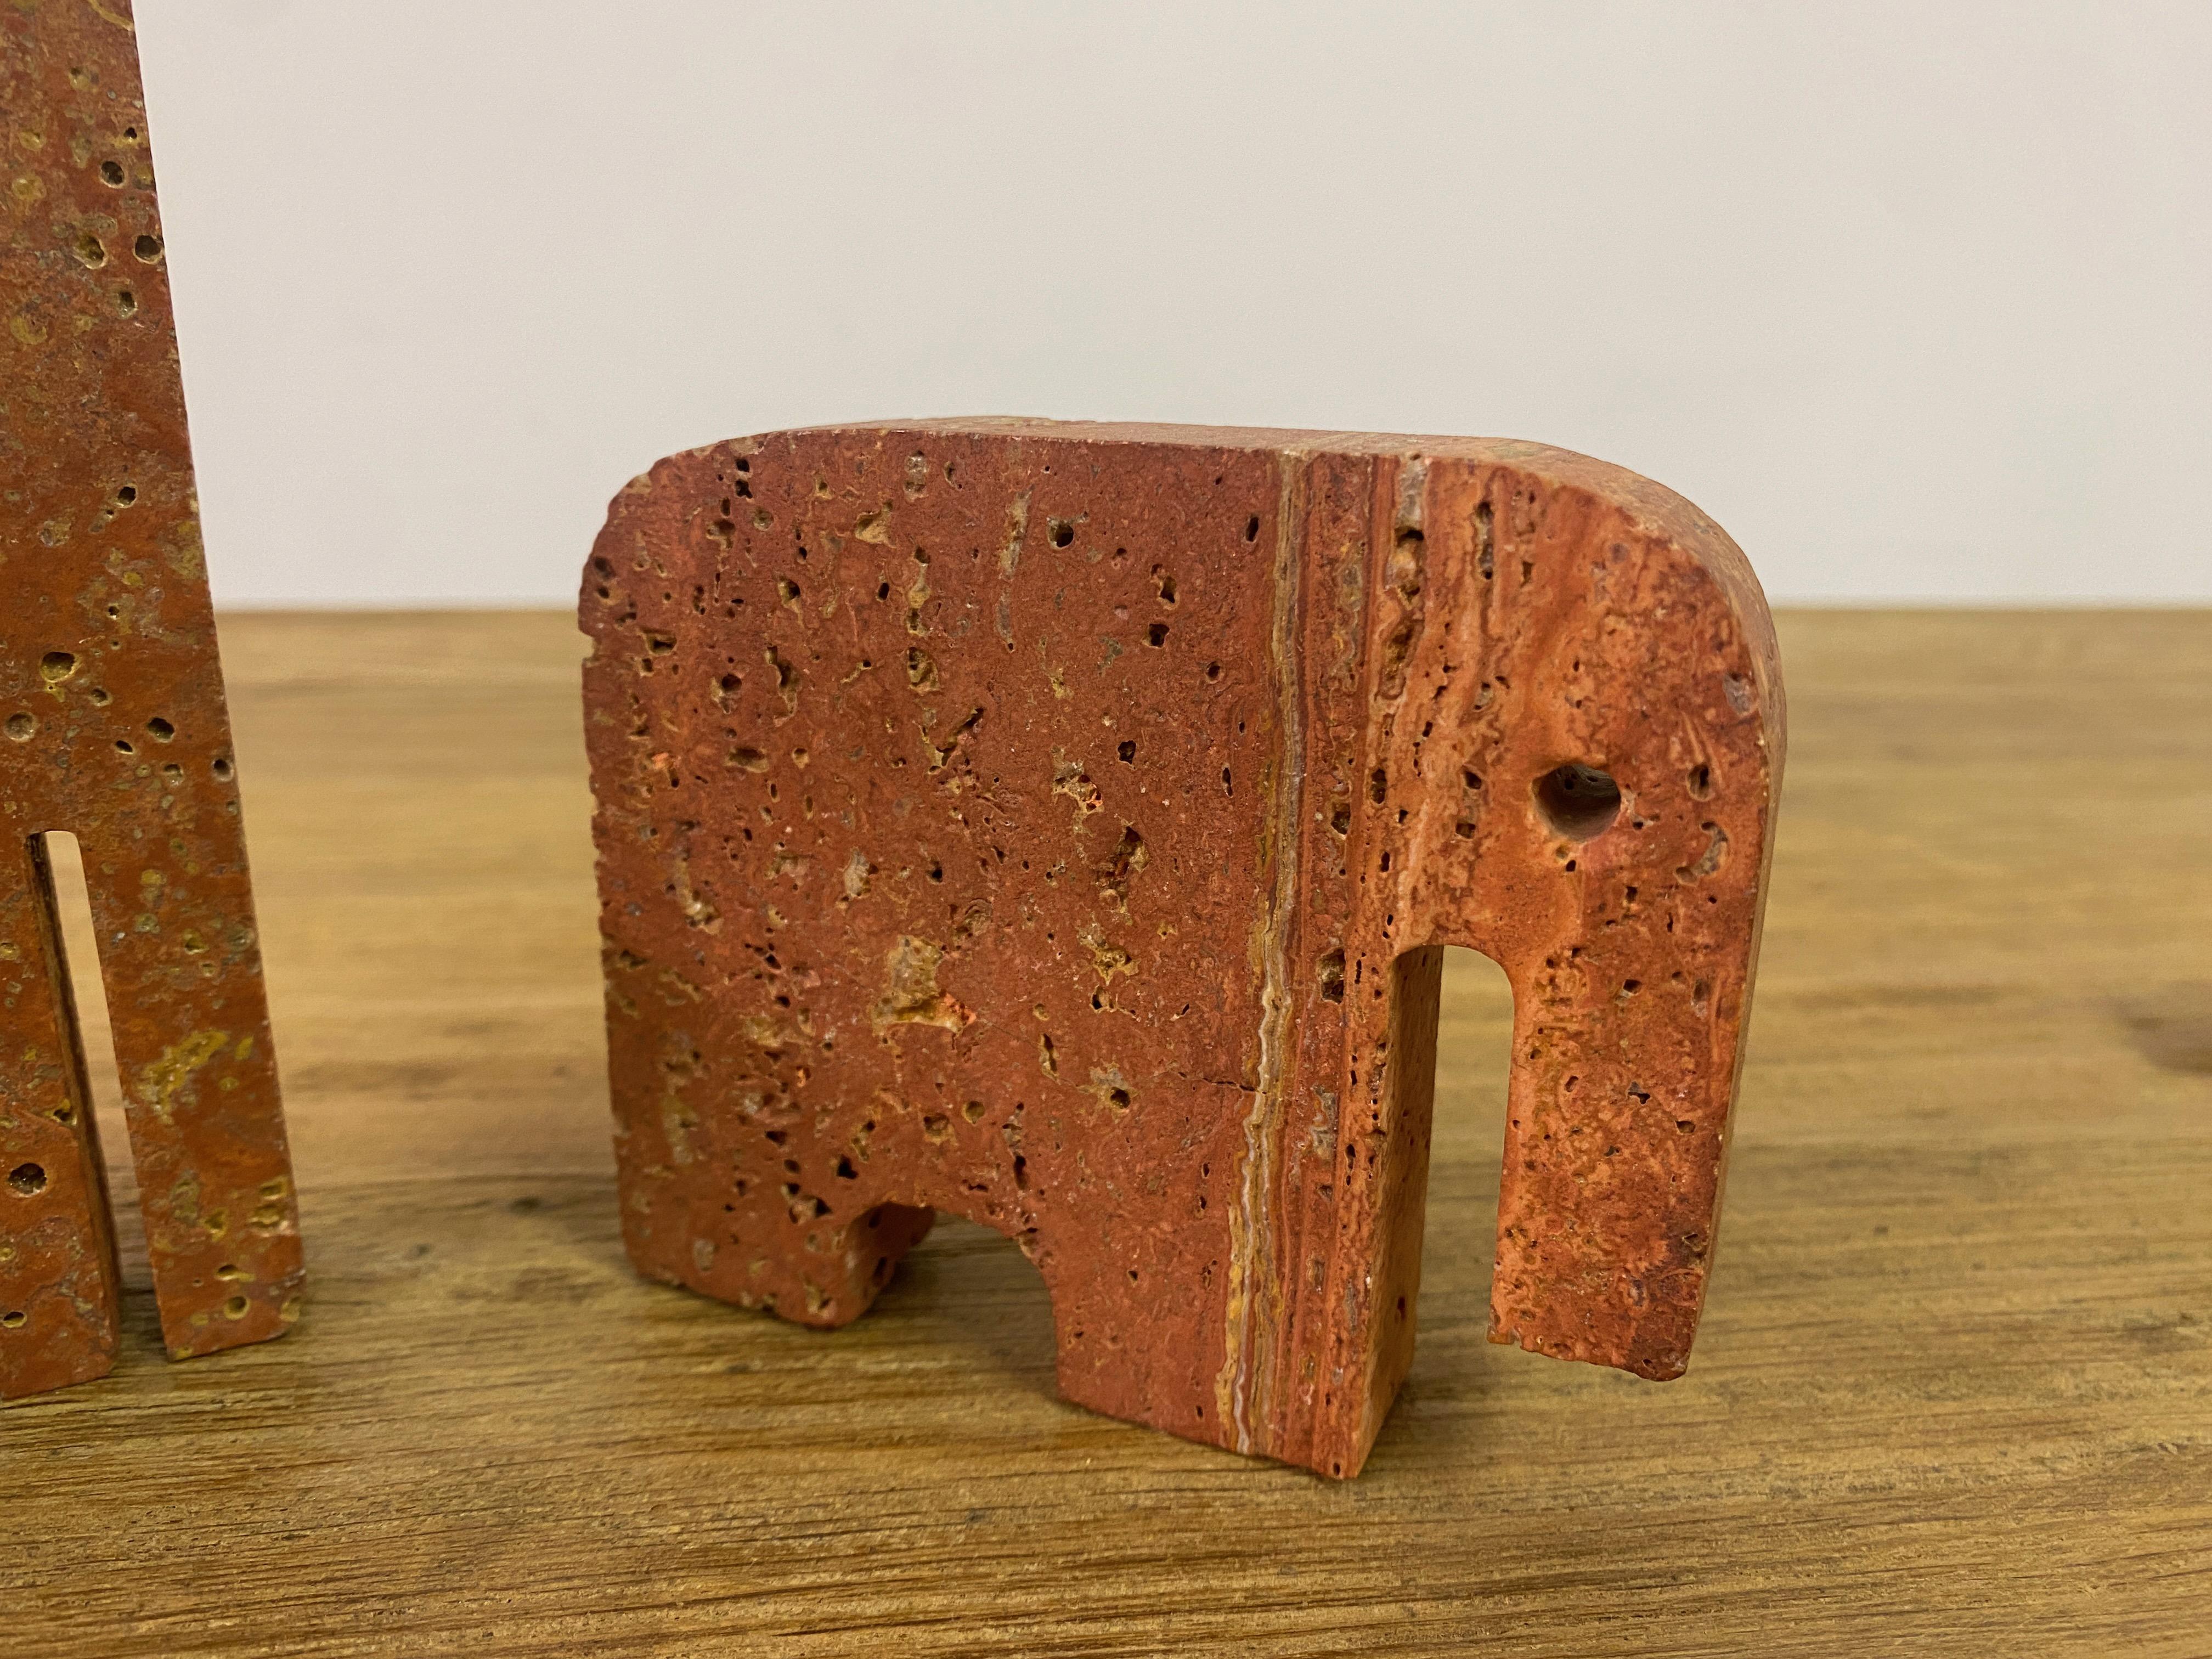 20th Century Pair Of Red Travertine Elephant Bookends And A Giraffe